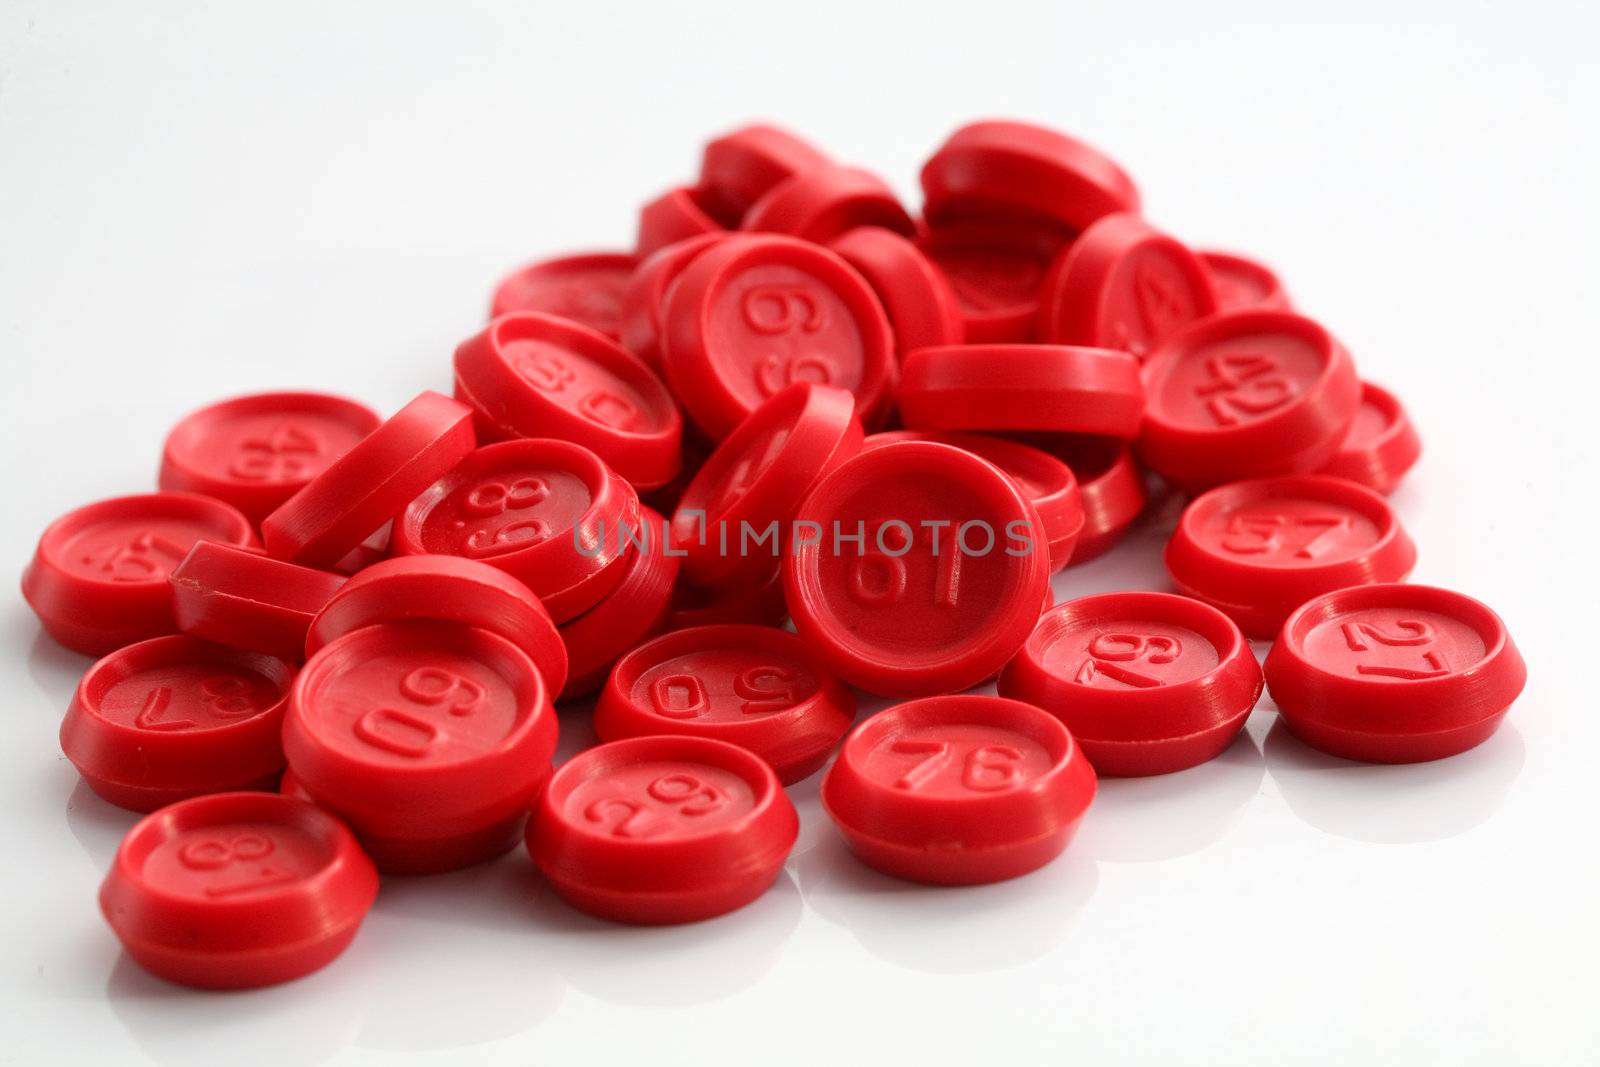 An image of red bingo game chips on white background